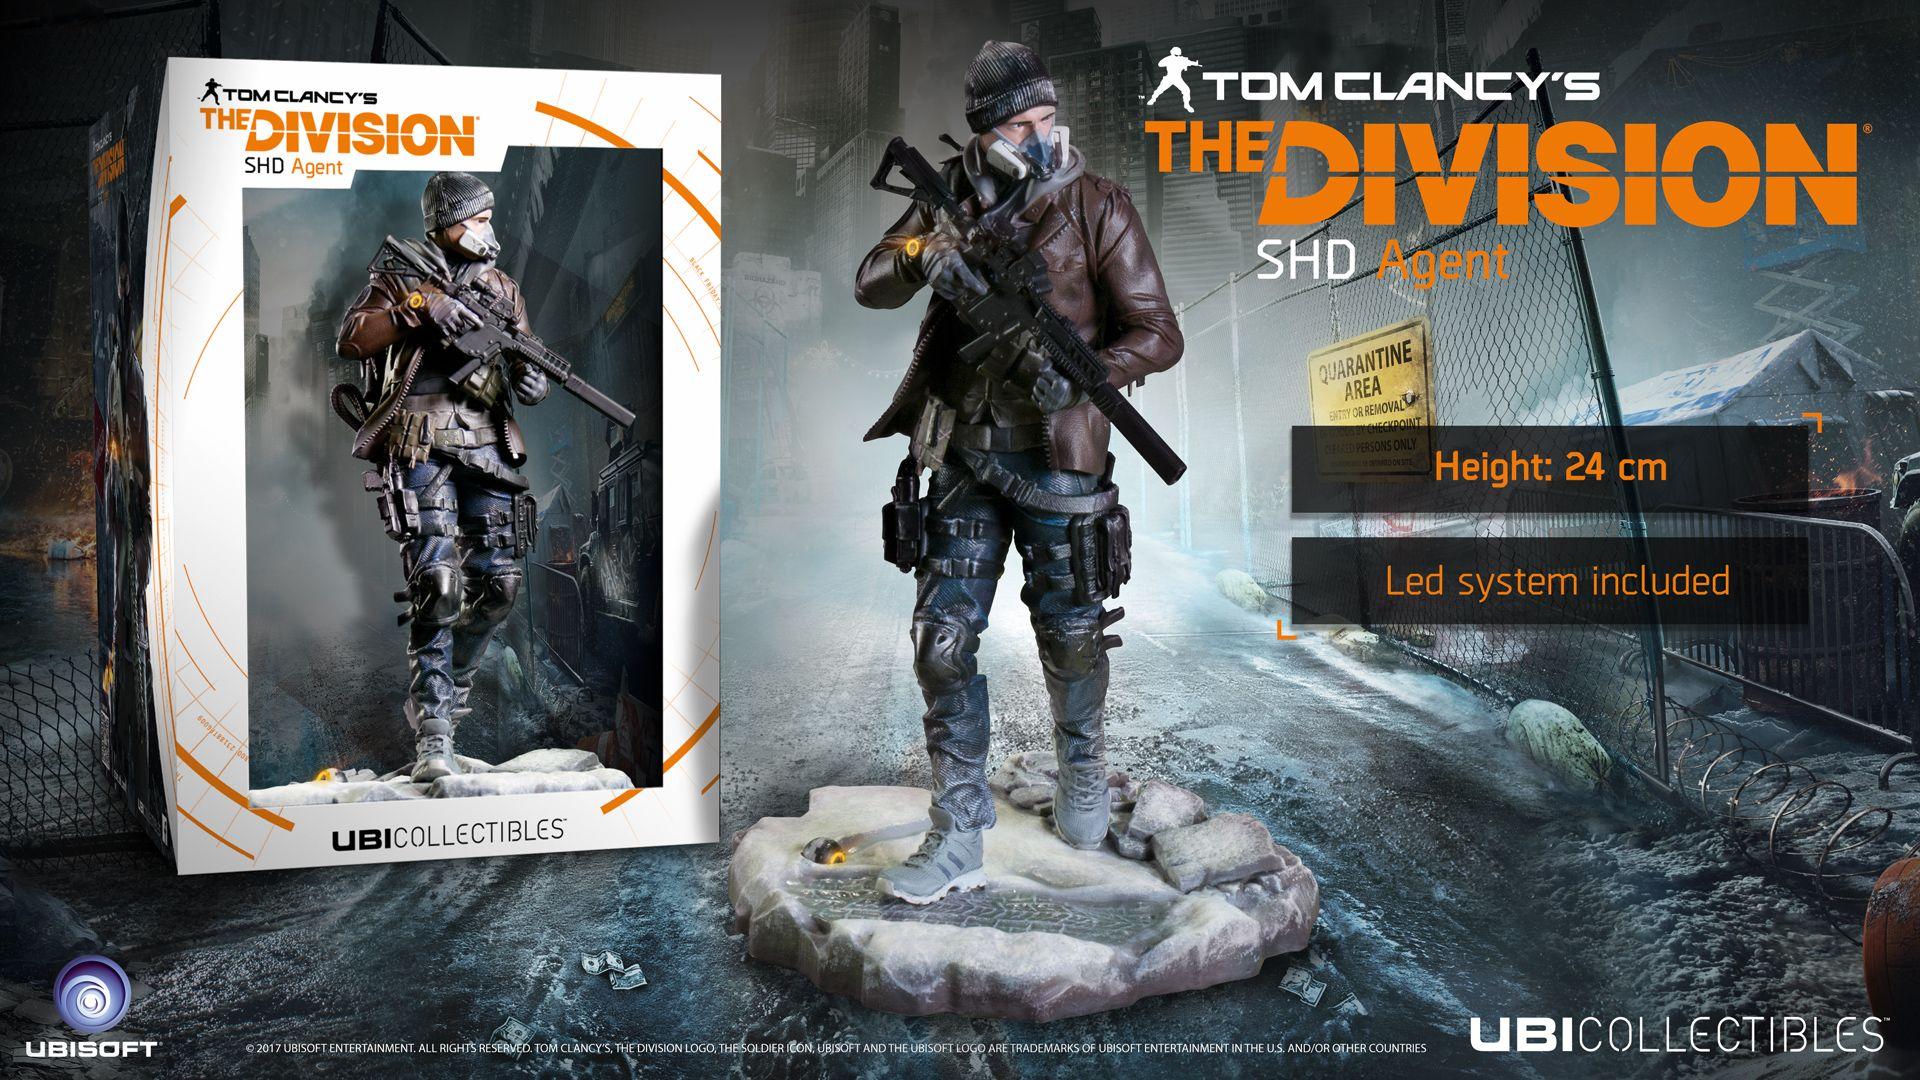 The Division Ubisoft Logo - Tom Clancy's The Division™ - SHD Agent